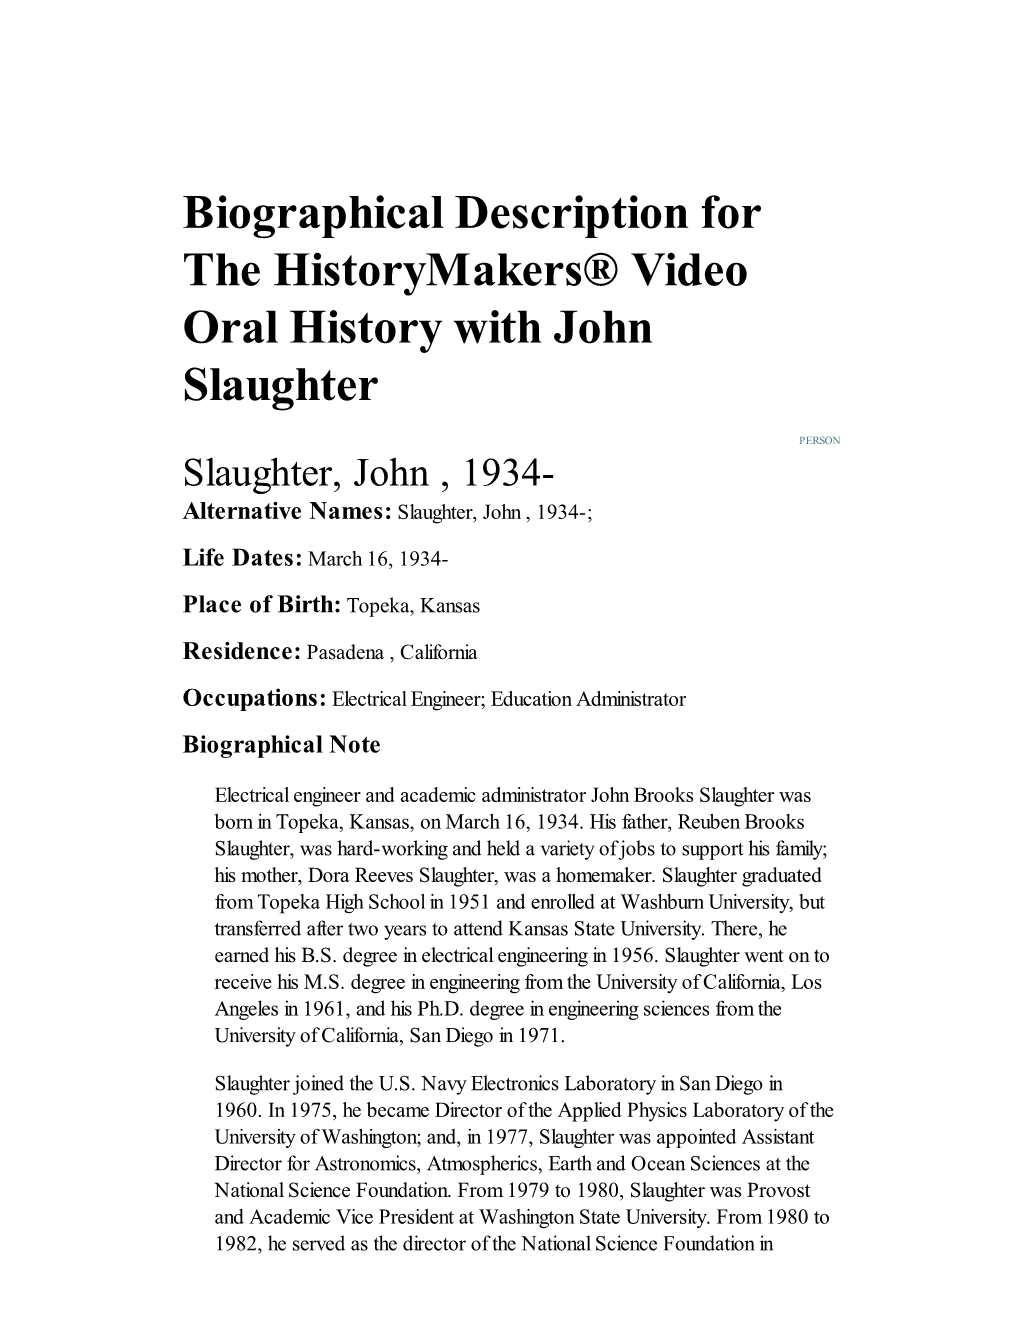 Biographical Description for the Historymakers® Video Oral History with John Slaughter